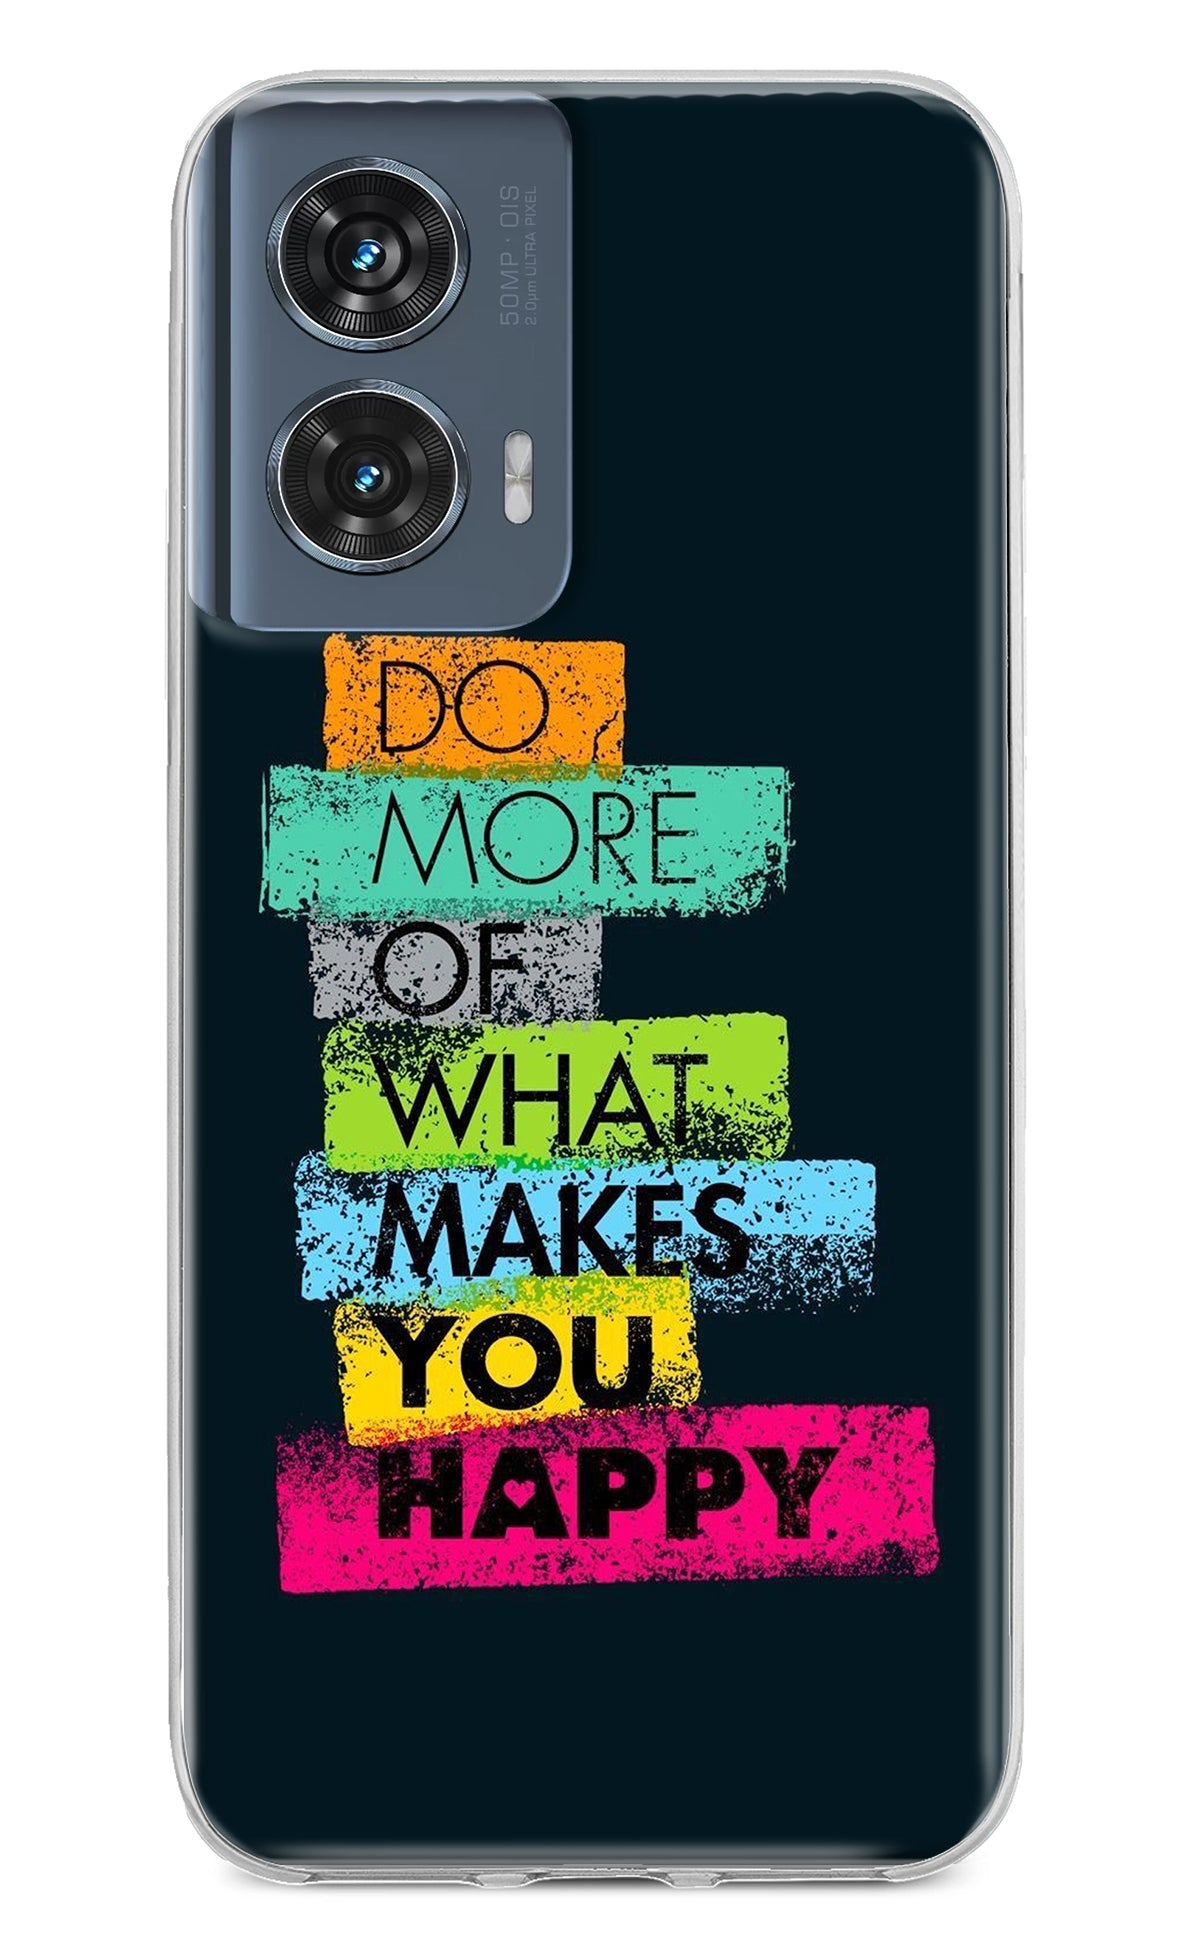 Do More Of What Makes You Happy Moto Edge 50 Fusion Back Cover